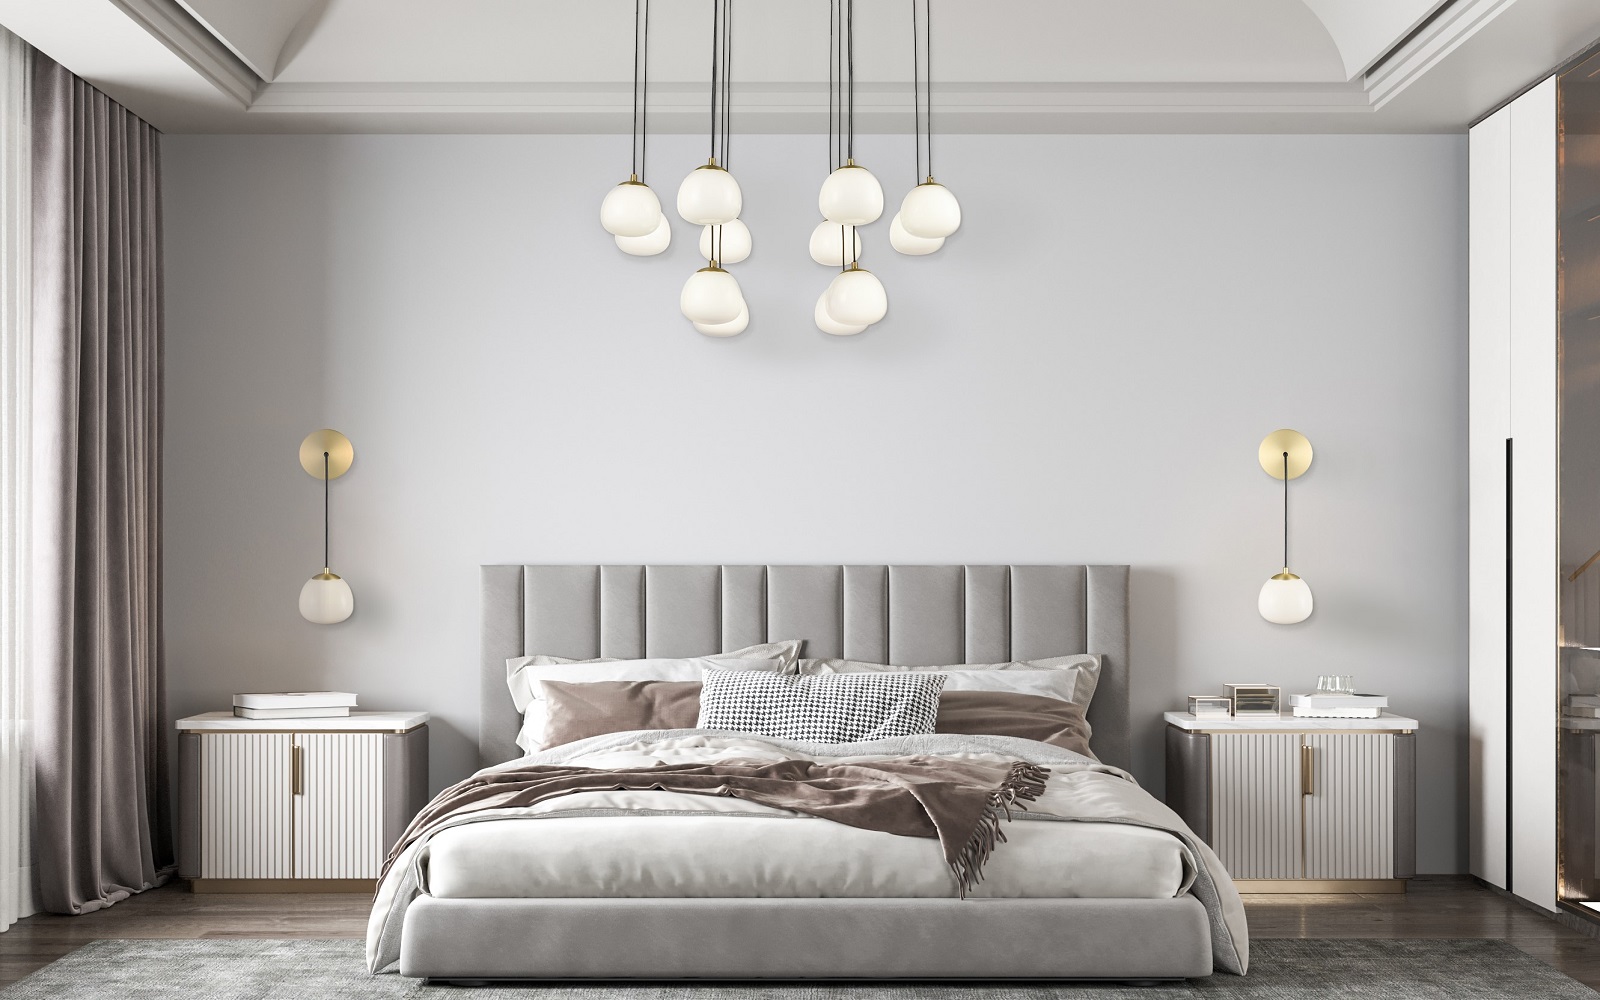 Vermeer wall and ceiling lighting design by Franklite